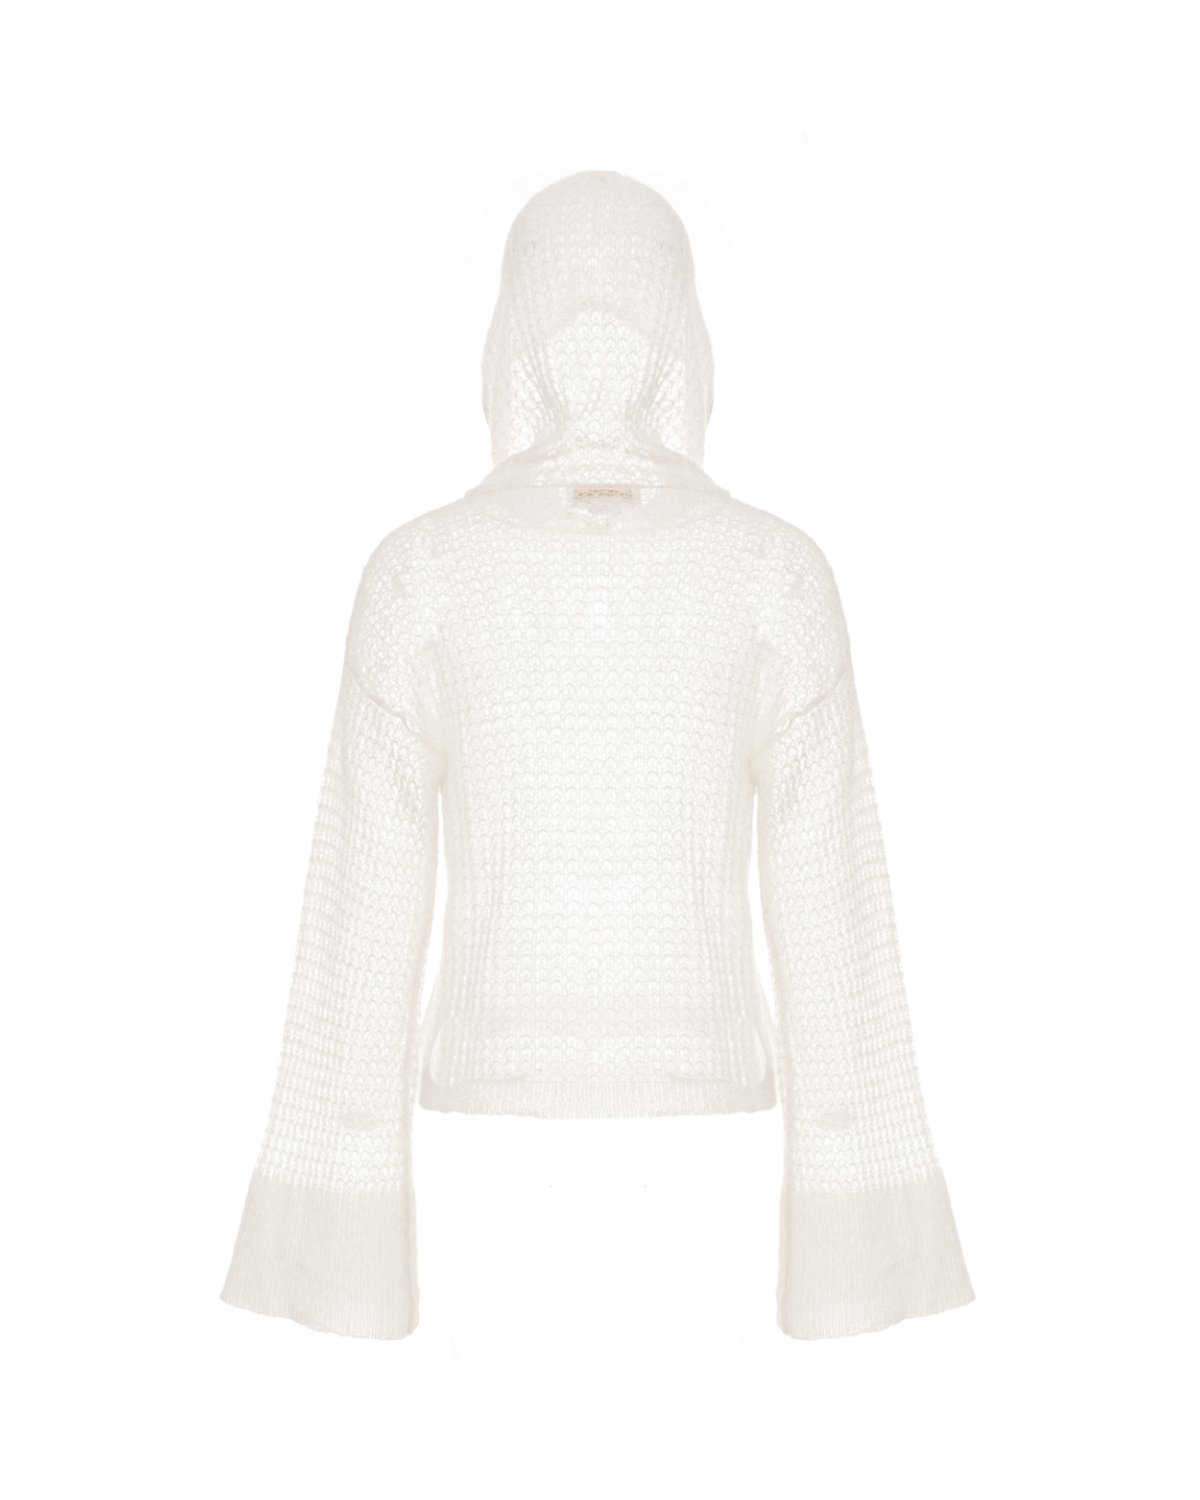 White Hooded mohair wool sweater | Sale, -50%, Private sale, -40% | Genny